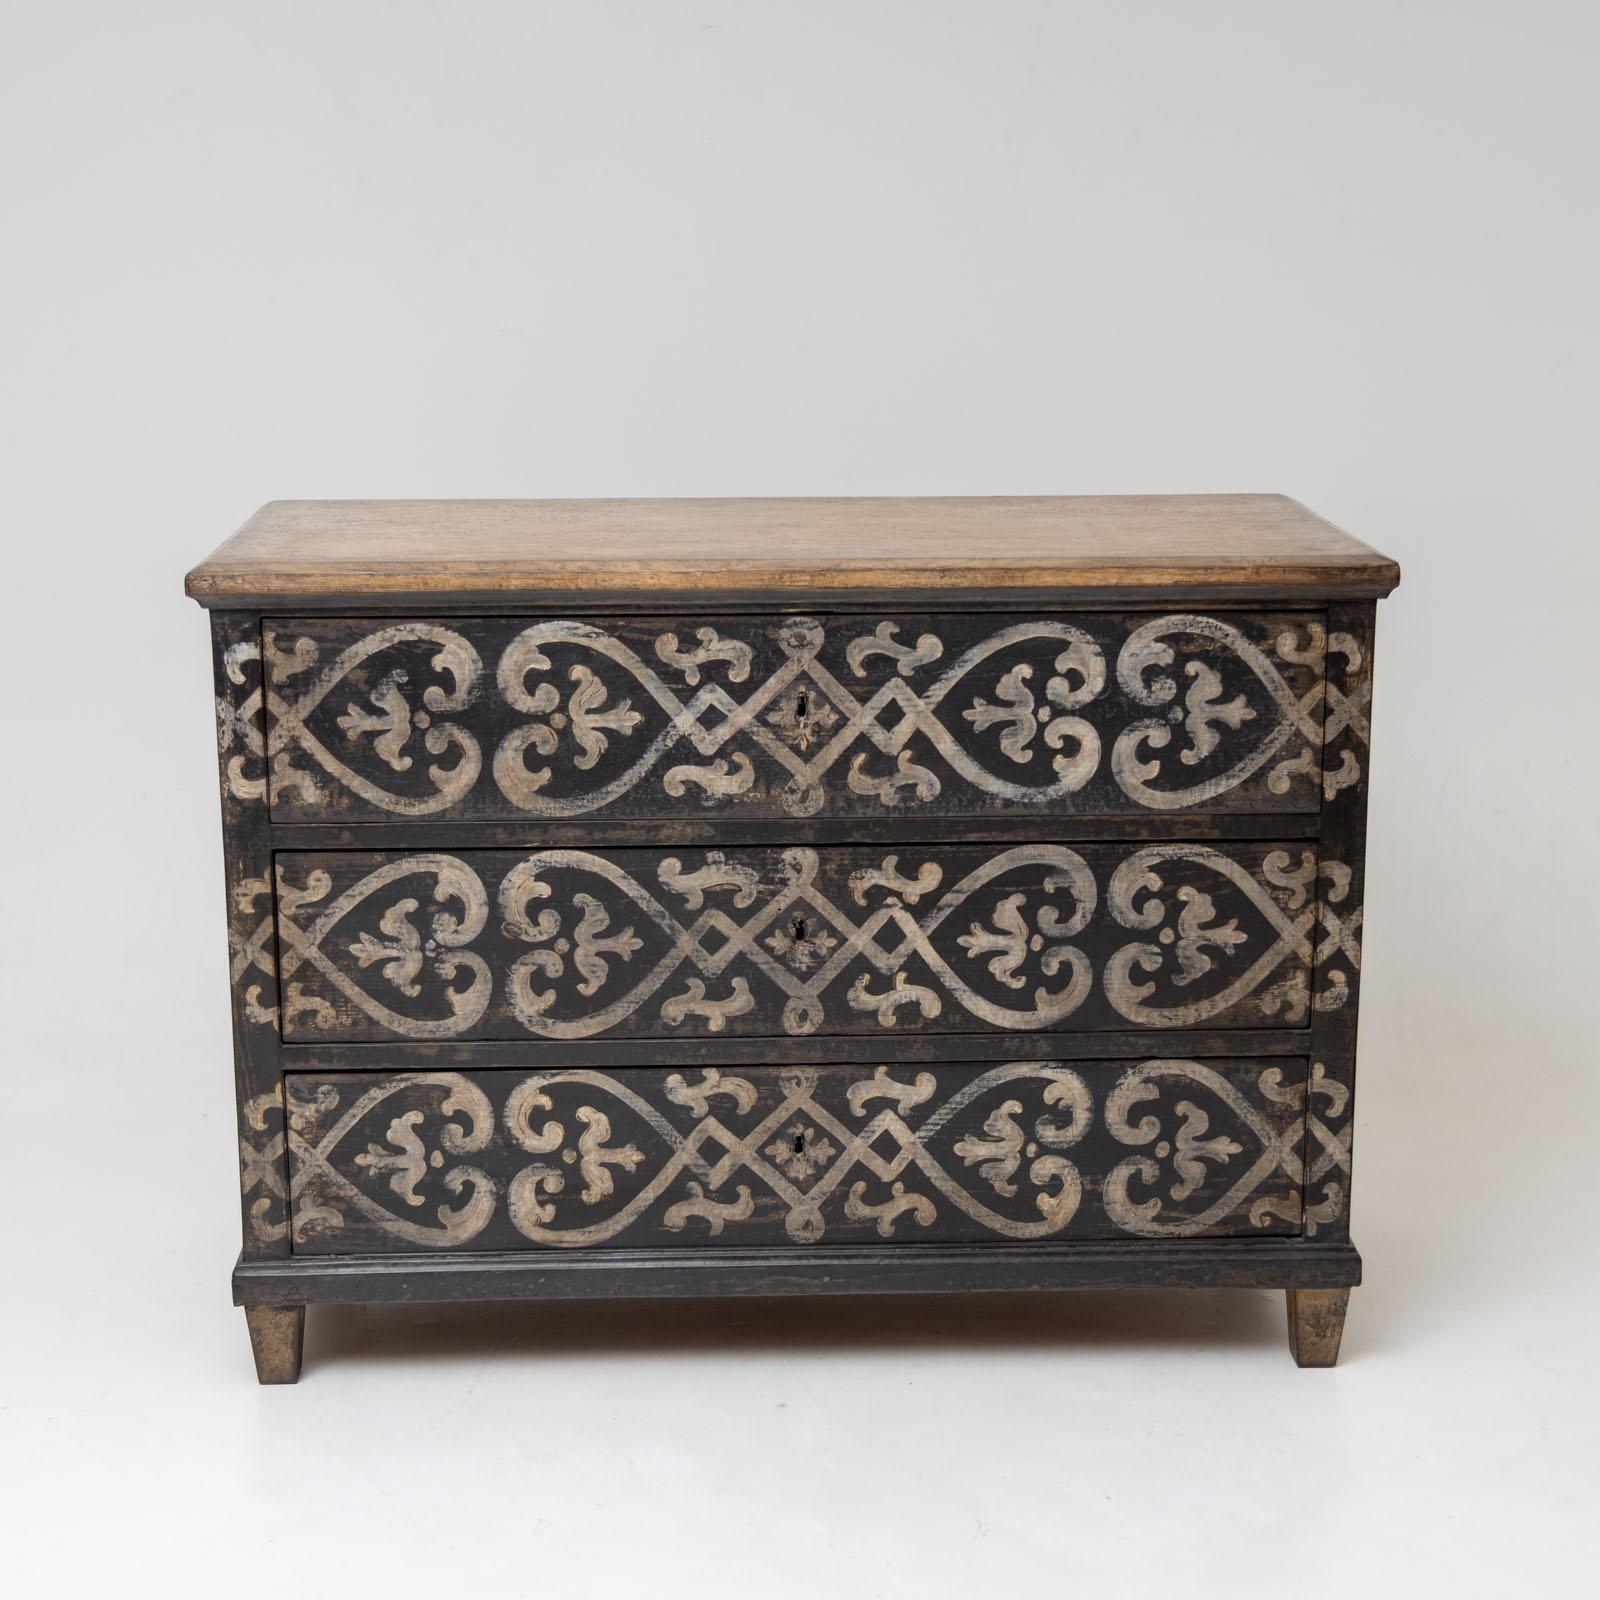 Large chest of drawers with three drawers on low square legs. The dark gray setting with heart-shaped decorations in cream white is new and has been given an antique patina.